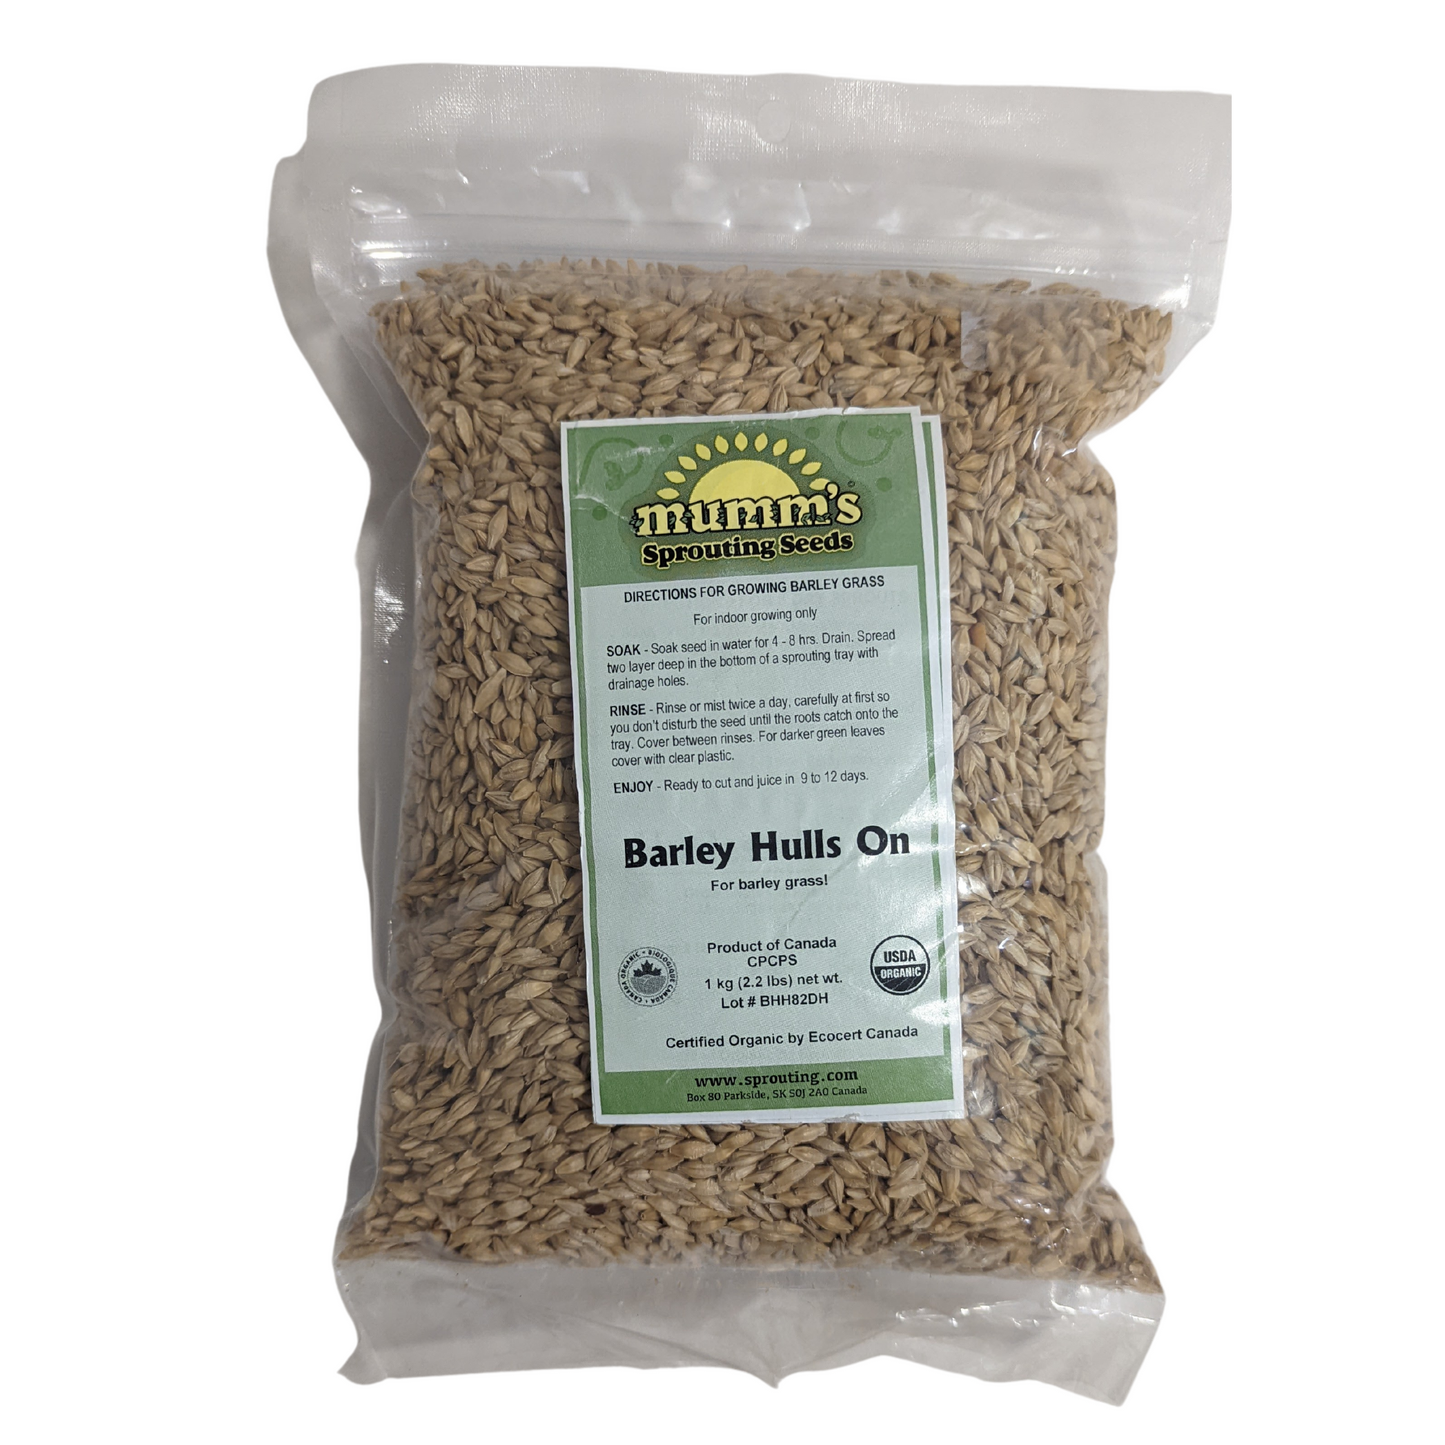 Sprouts Barley Hulls On 1 Kg